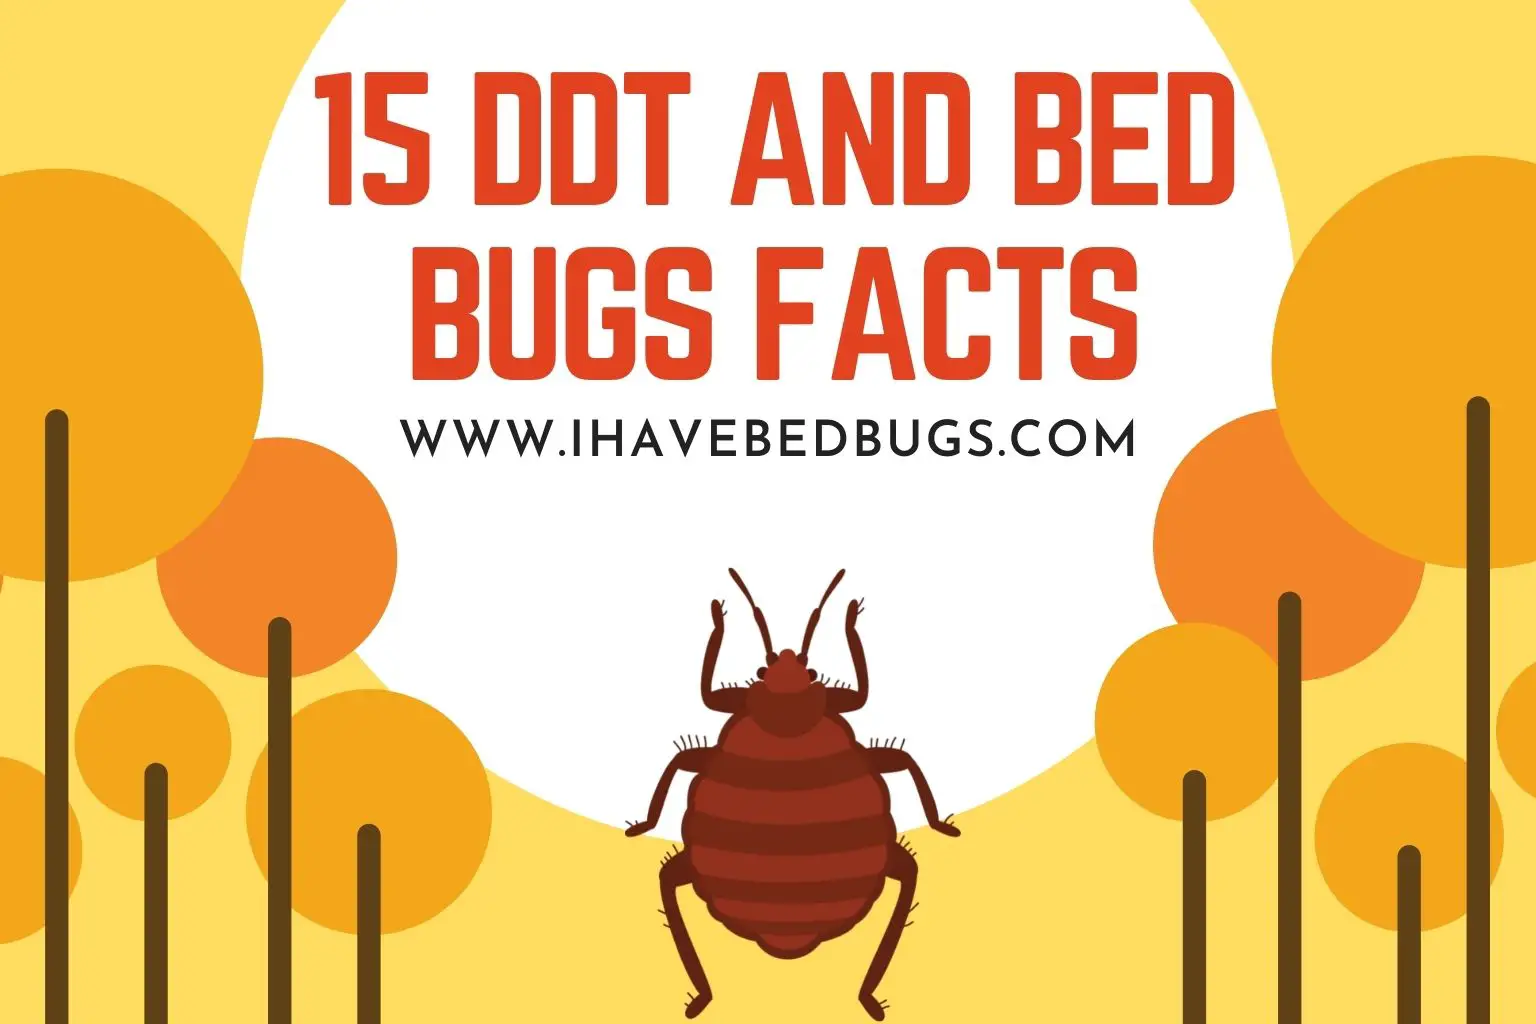 15 DDT and Bed Bugs Facts